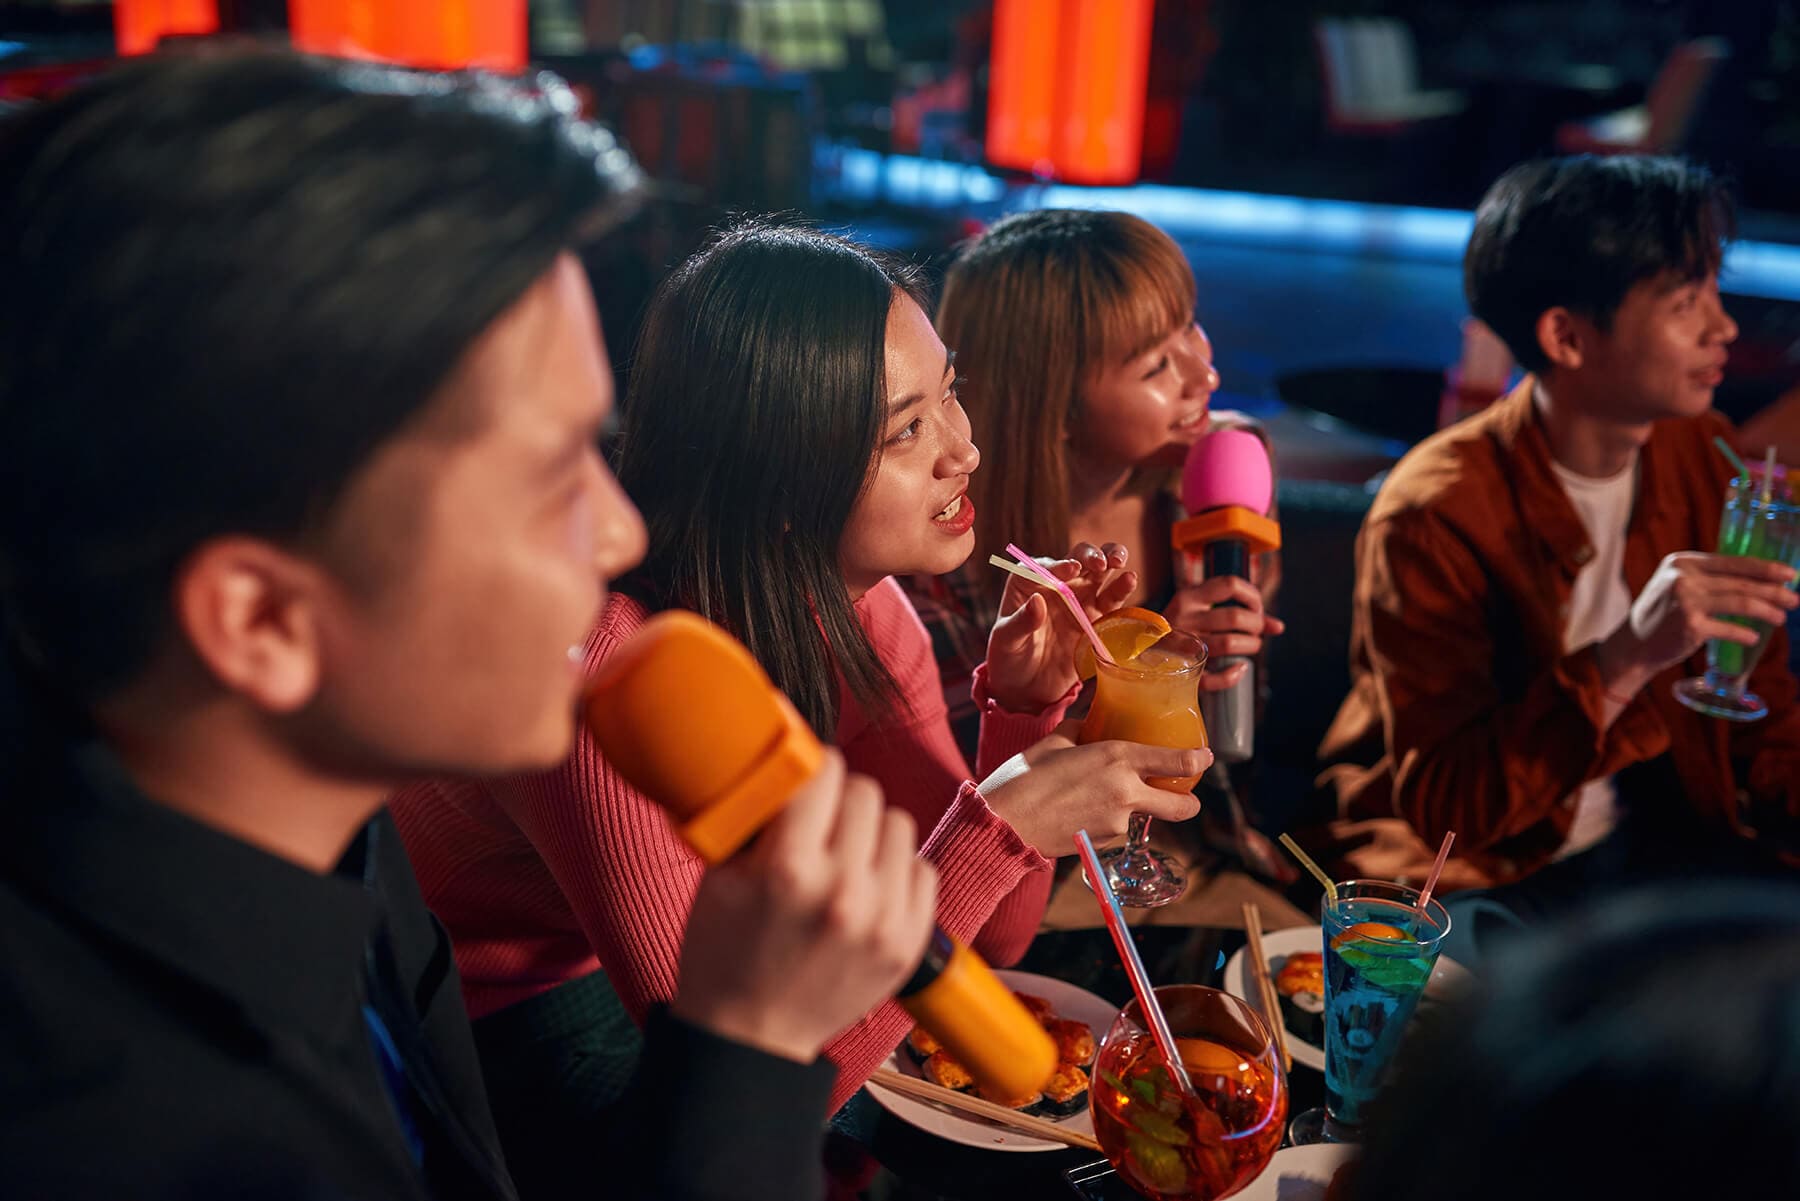 Sing your heart out to your favourite tunes at Aloha Karaoke & Cafe!